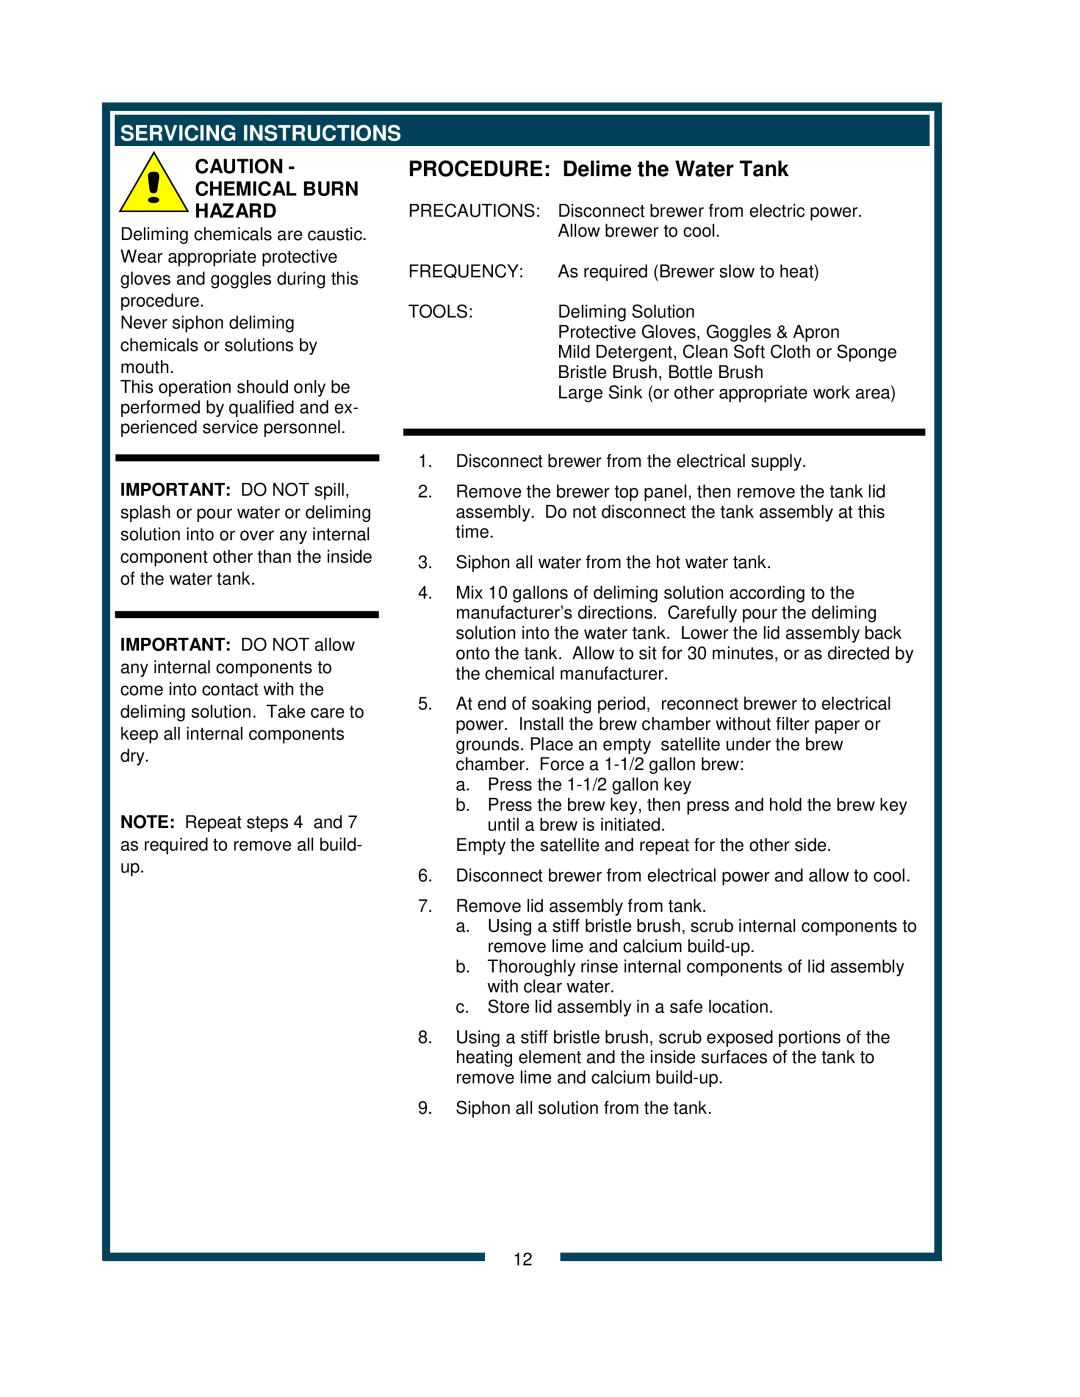 Bloomfield 9220 9221 owner manual Servicing Instructions, PROCEDURE Delime the Water Tank, Chemical Burn Hazard 